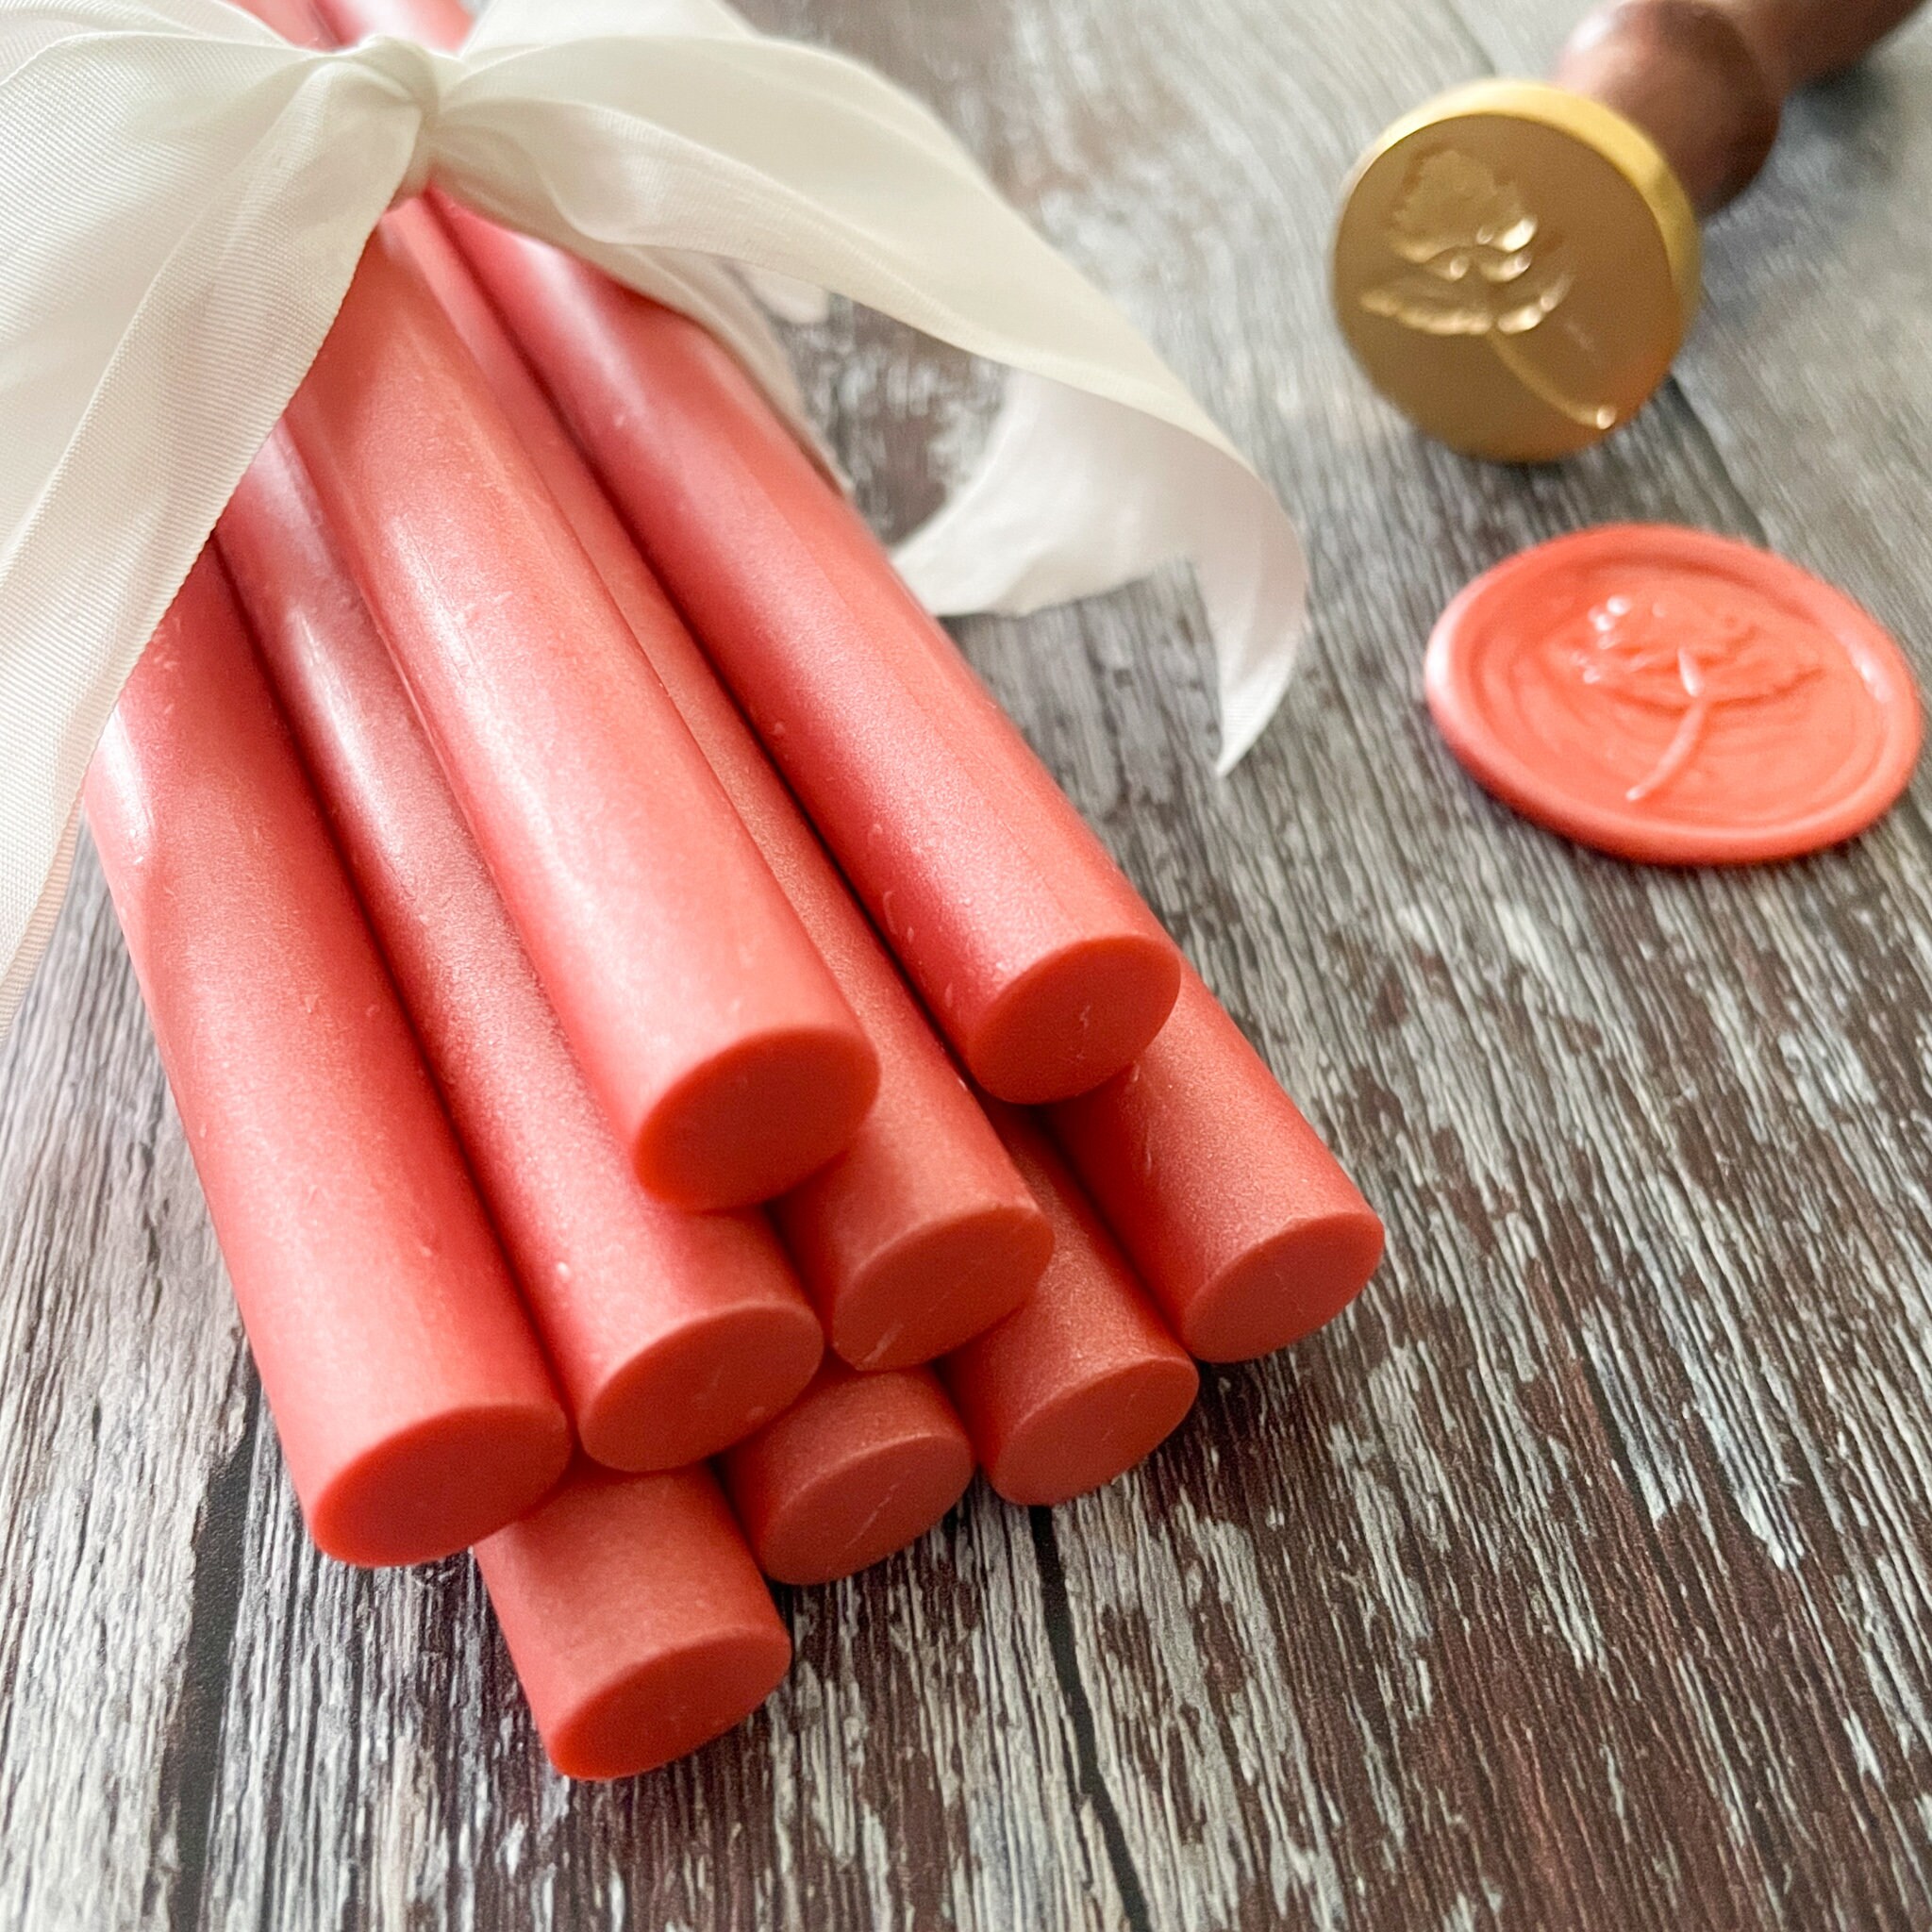 20 Pieces Glue Gun Wax Seal Sticks for Wax Seal Glue Gun, Envelope Seal Glue Gun Sealing Wax Mini Glue Stick Great for Letter Wax Sealing Stamp (Red)